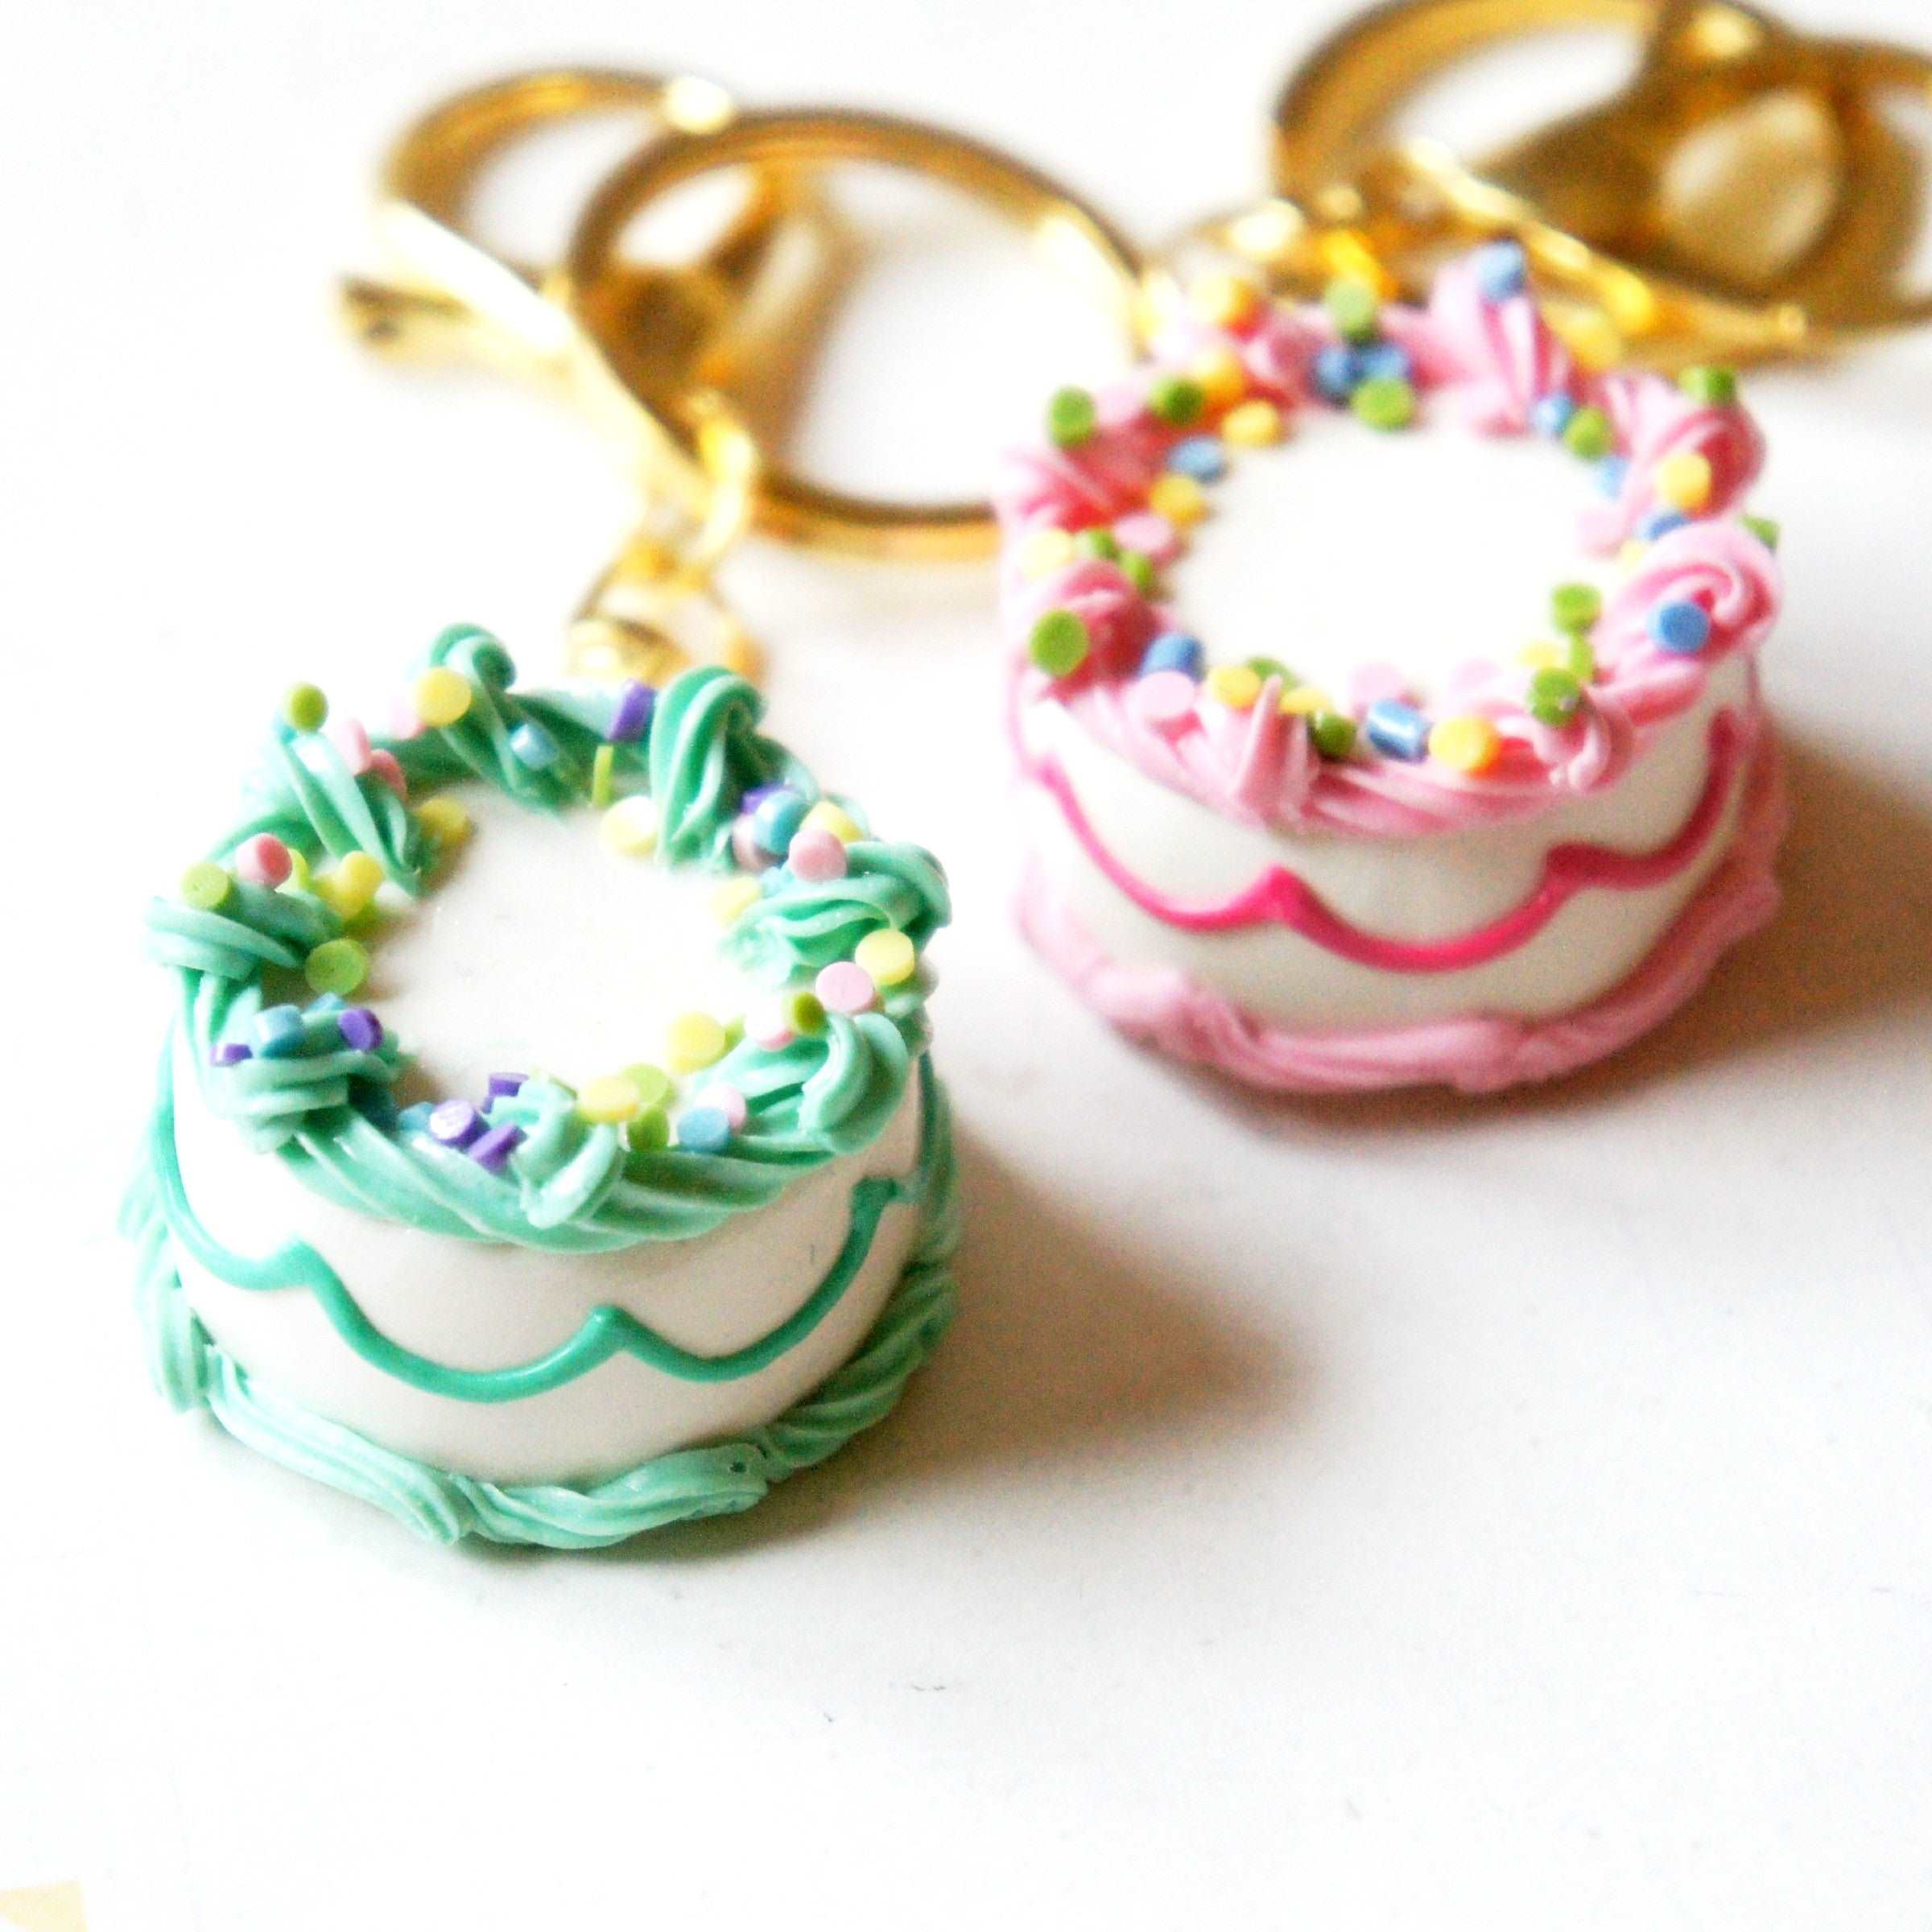 Birthday Cake Keychain - Jillicious charms and accessories